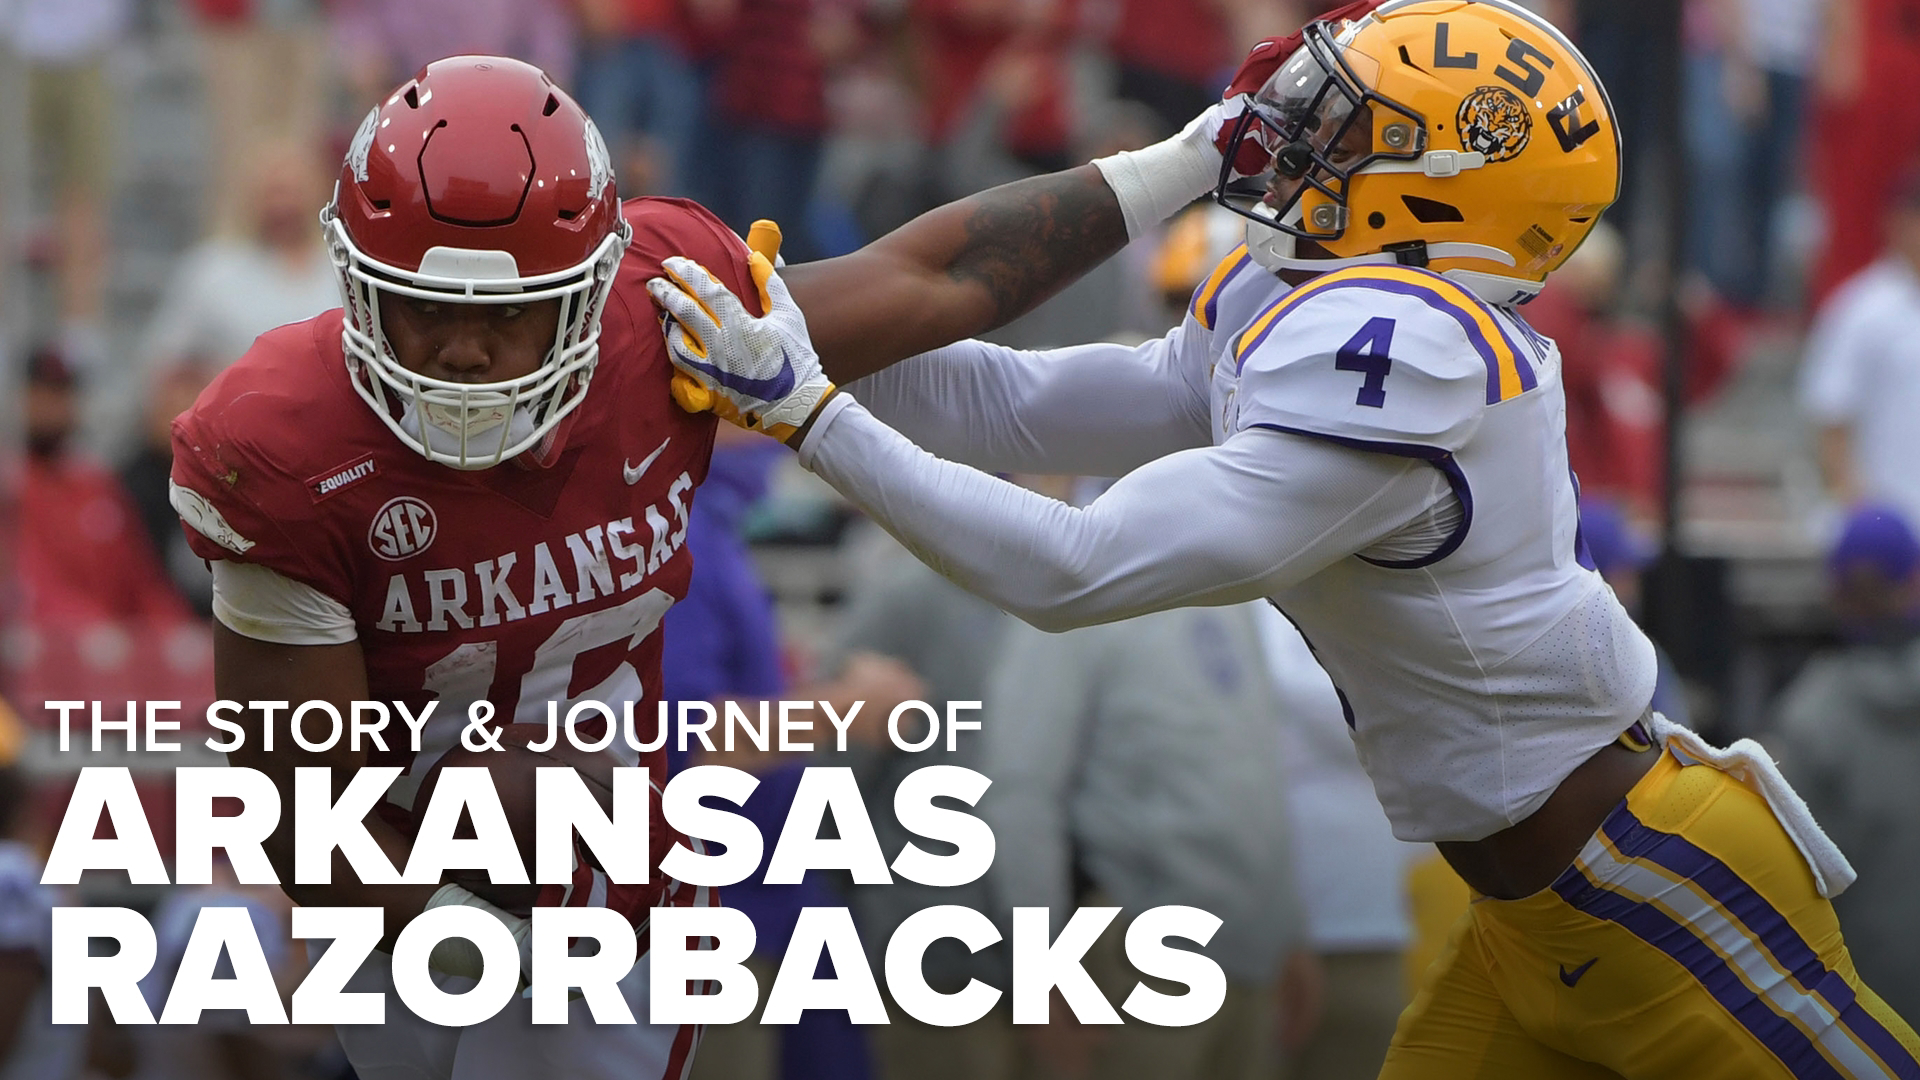 From Treylon Burks to Dre Greenlaw, enjoy this collection of stories about former Arkansas Razorbacks.